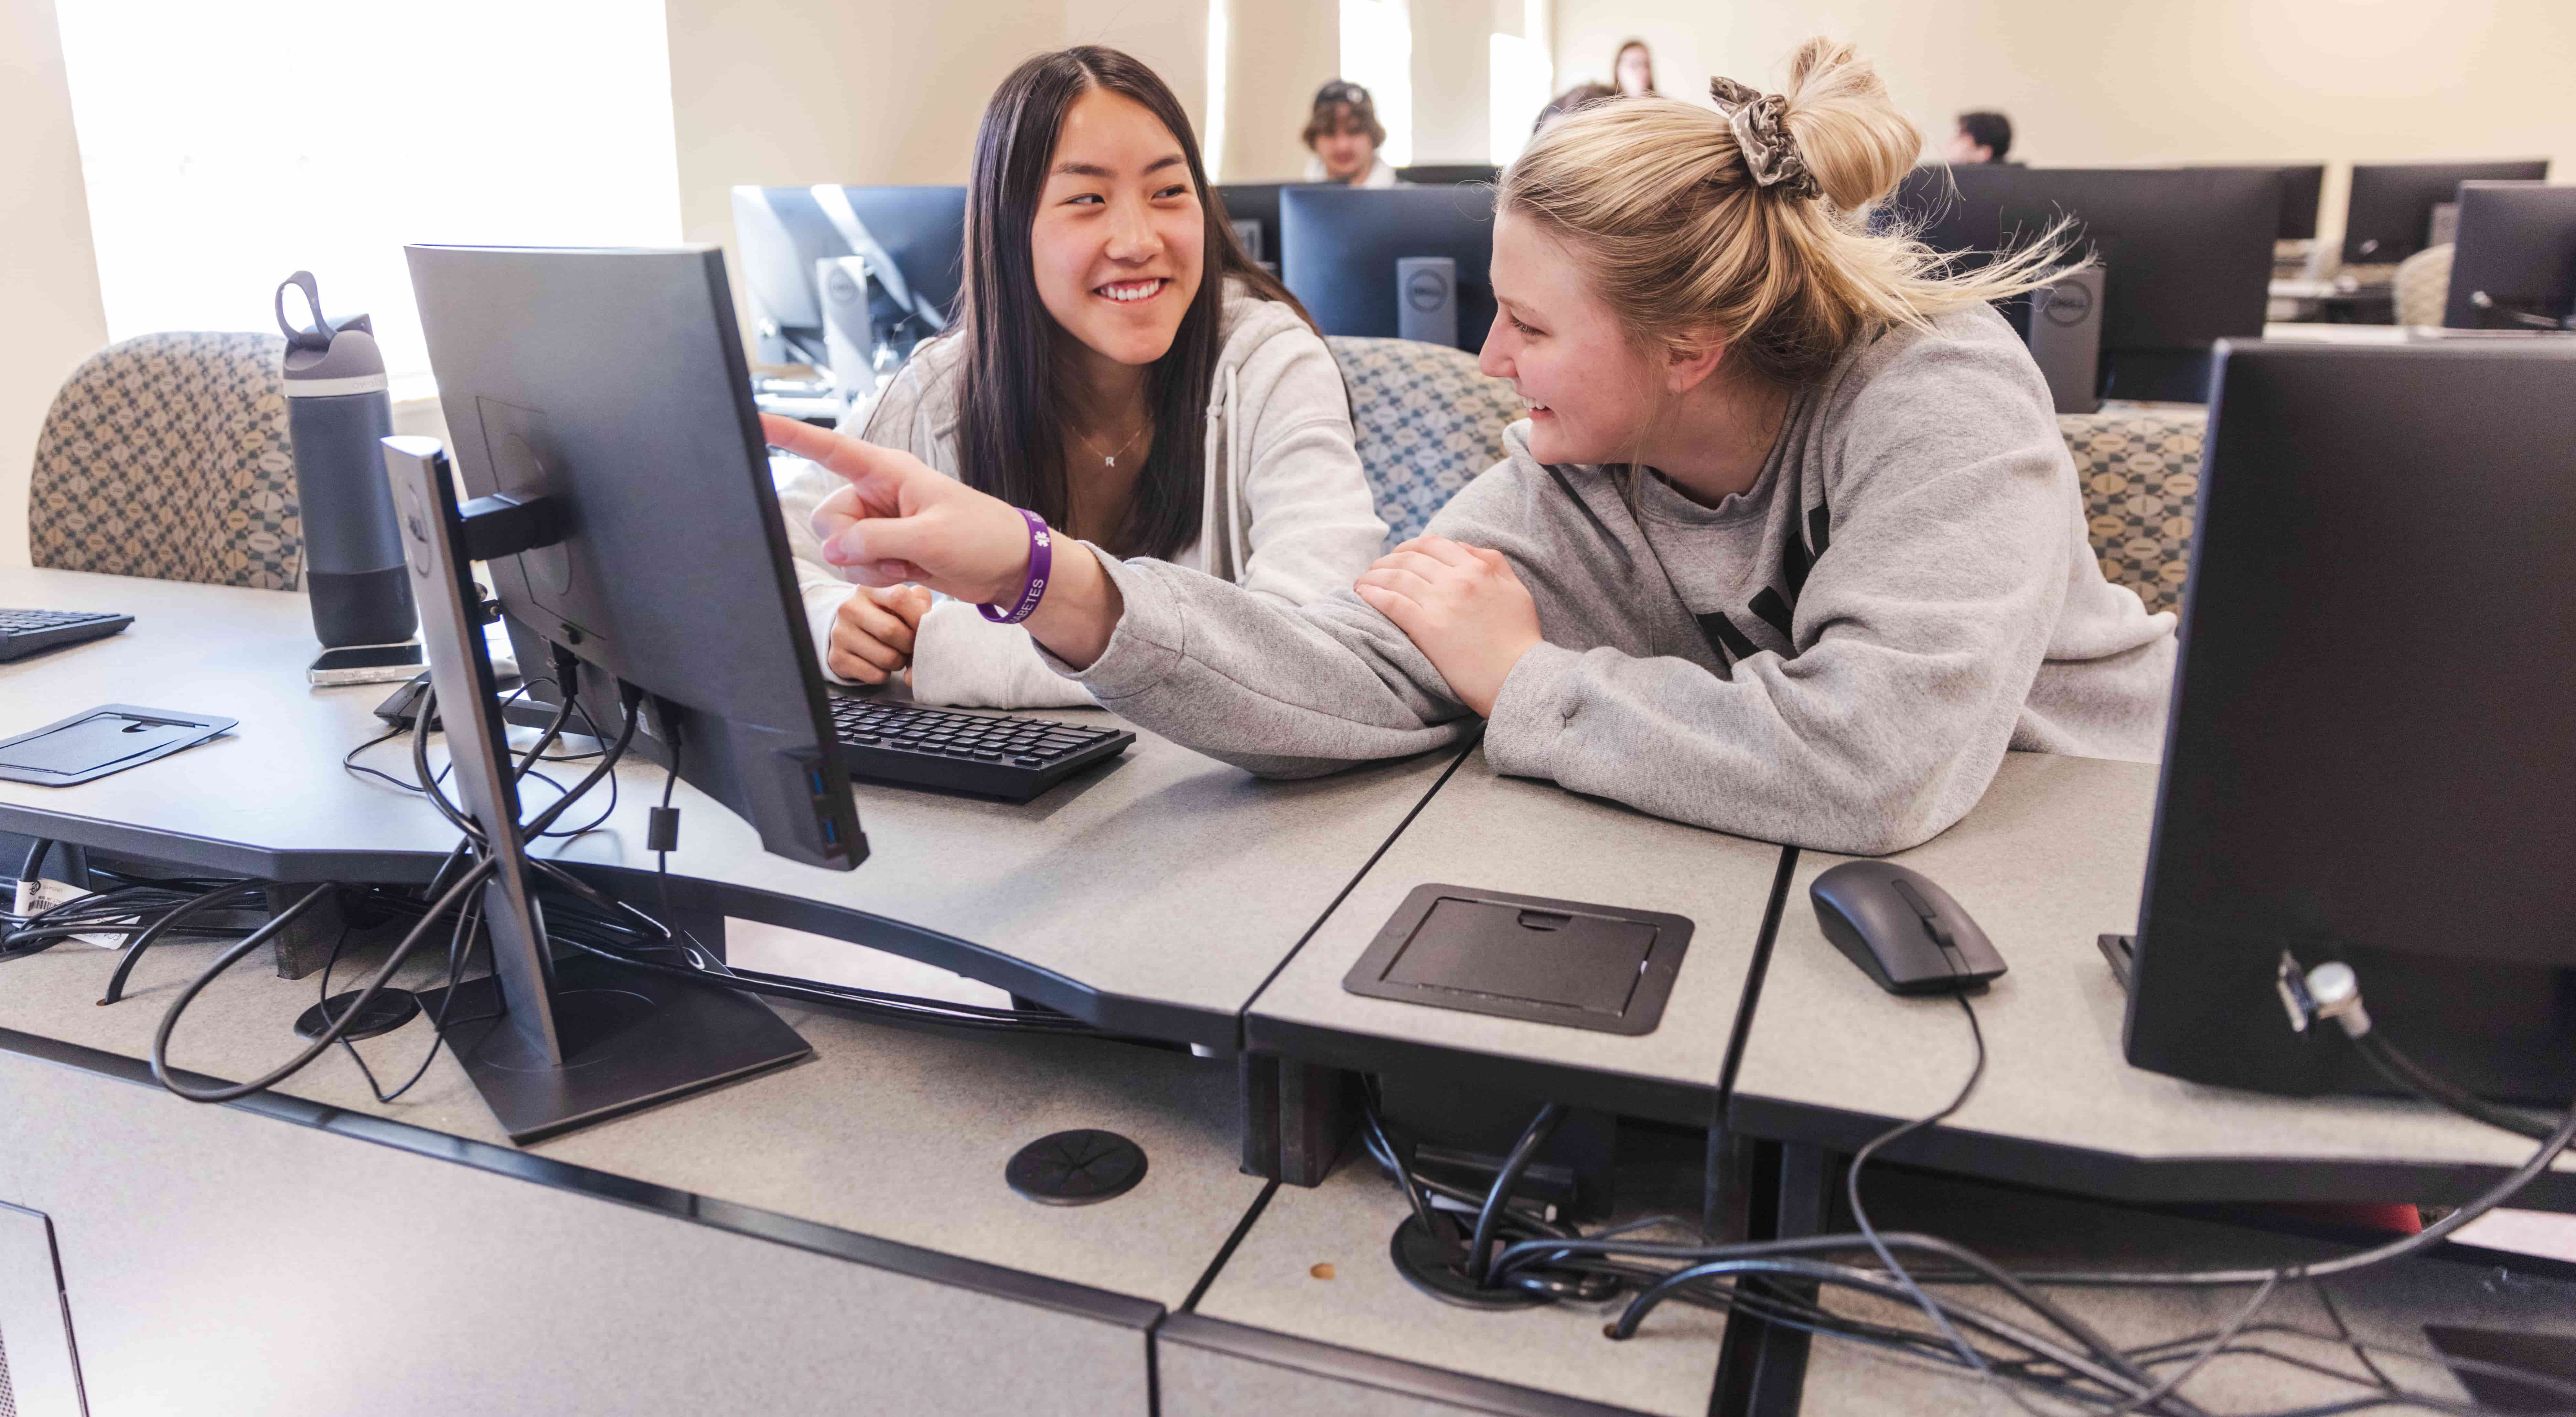 Two female students working at computer